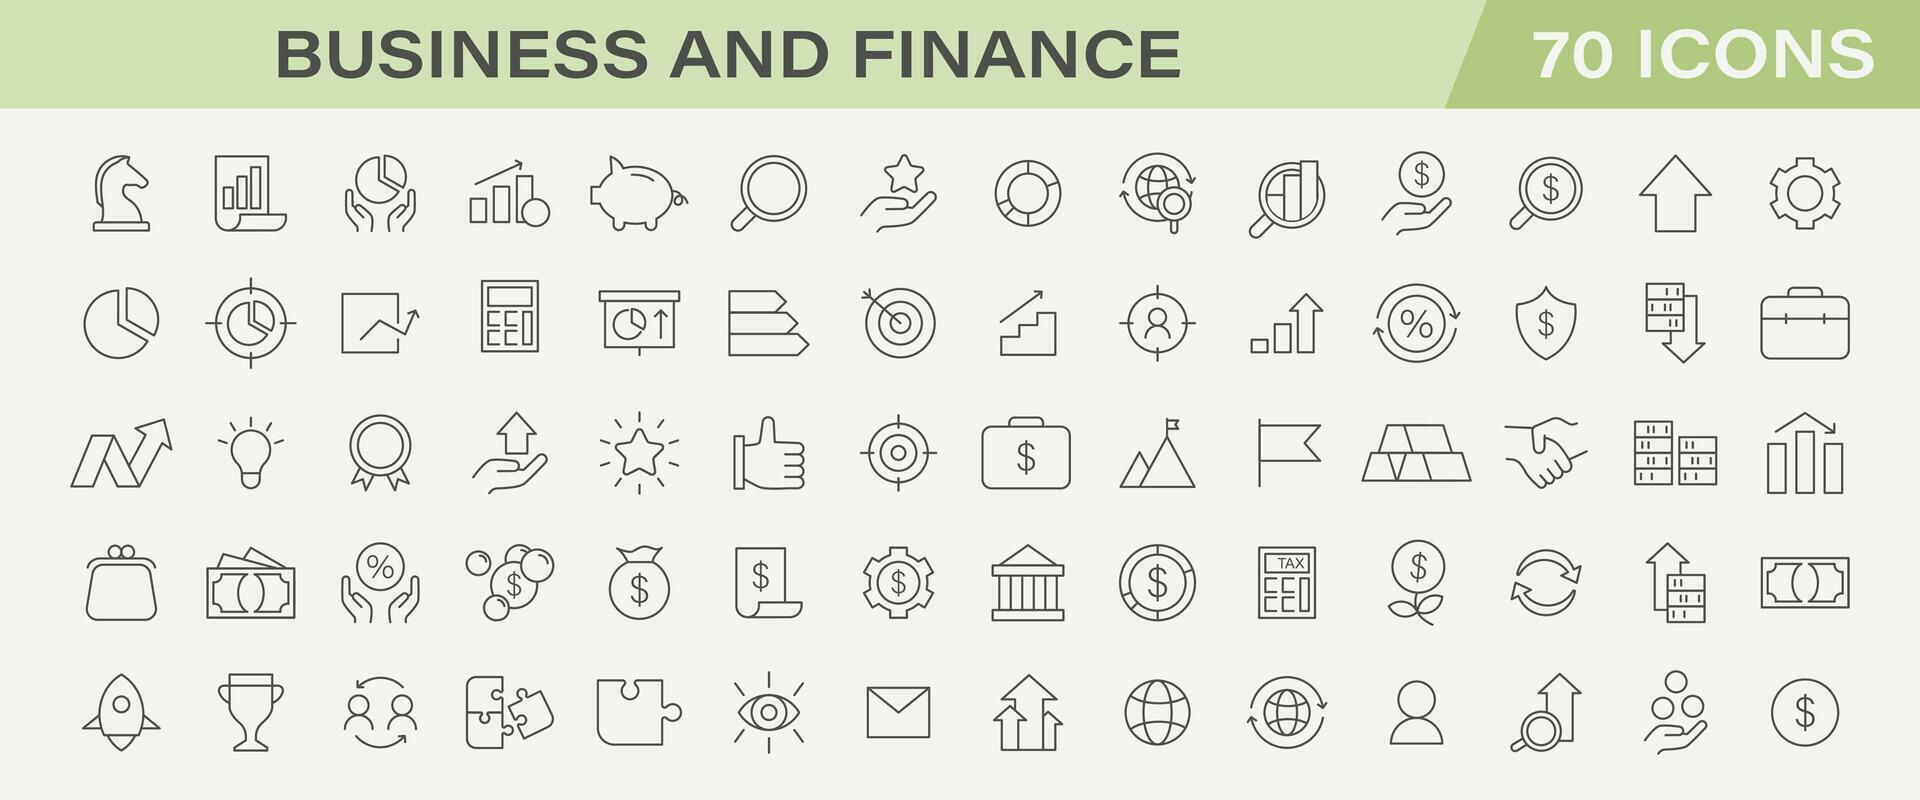 Business and finances line icons collection. Corporate growth, market investment strategy. vector